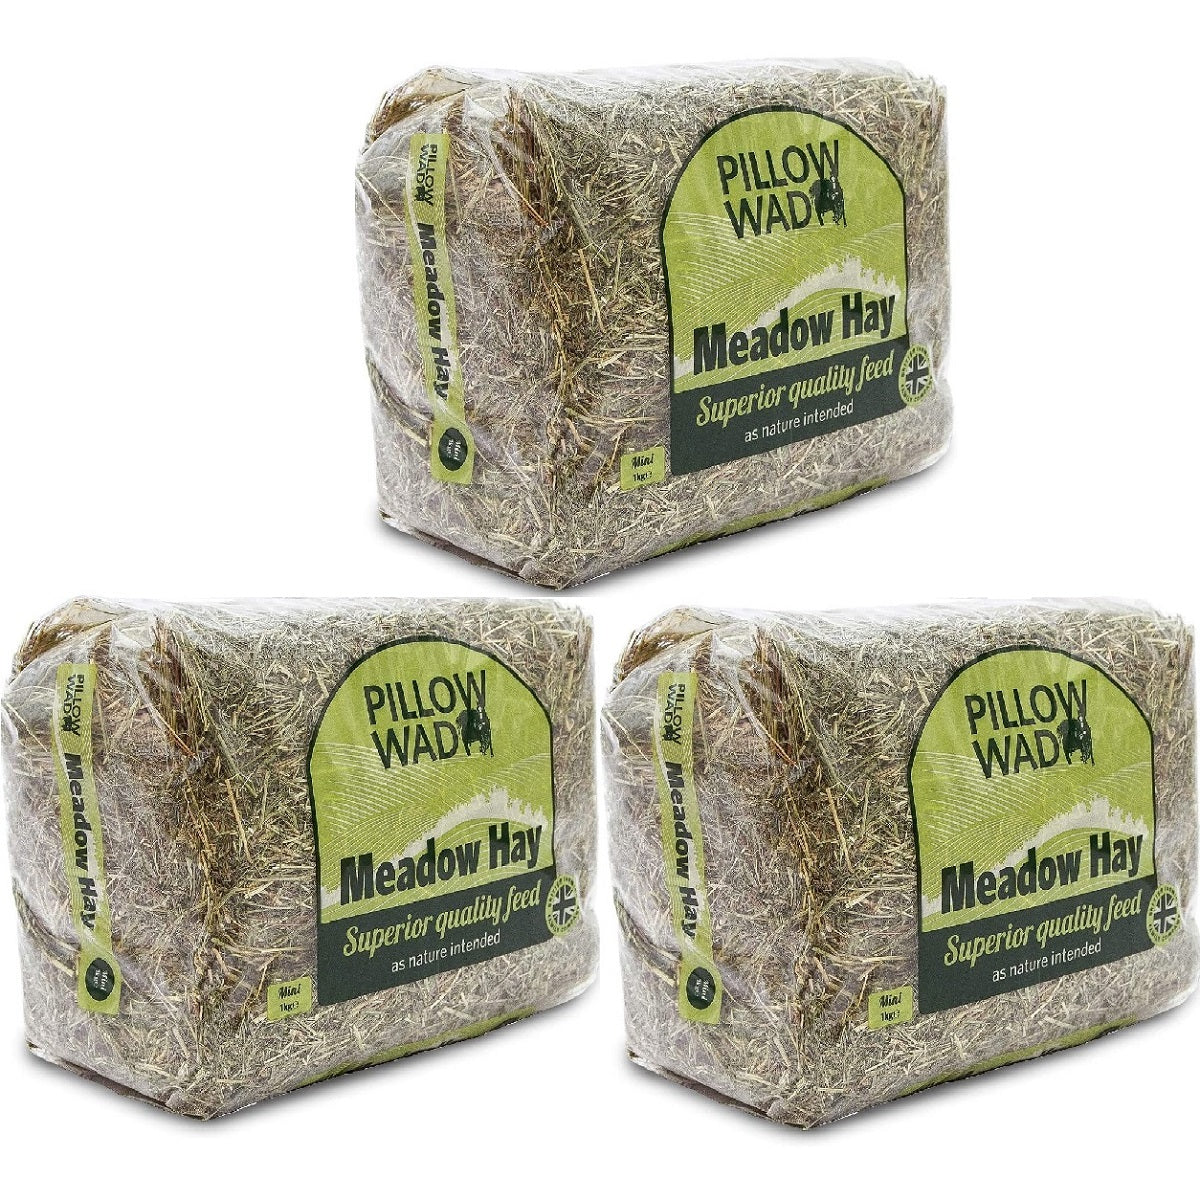 Pillow Wad - Meadow Hay (1kg)